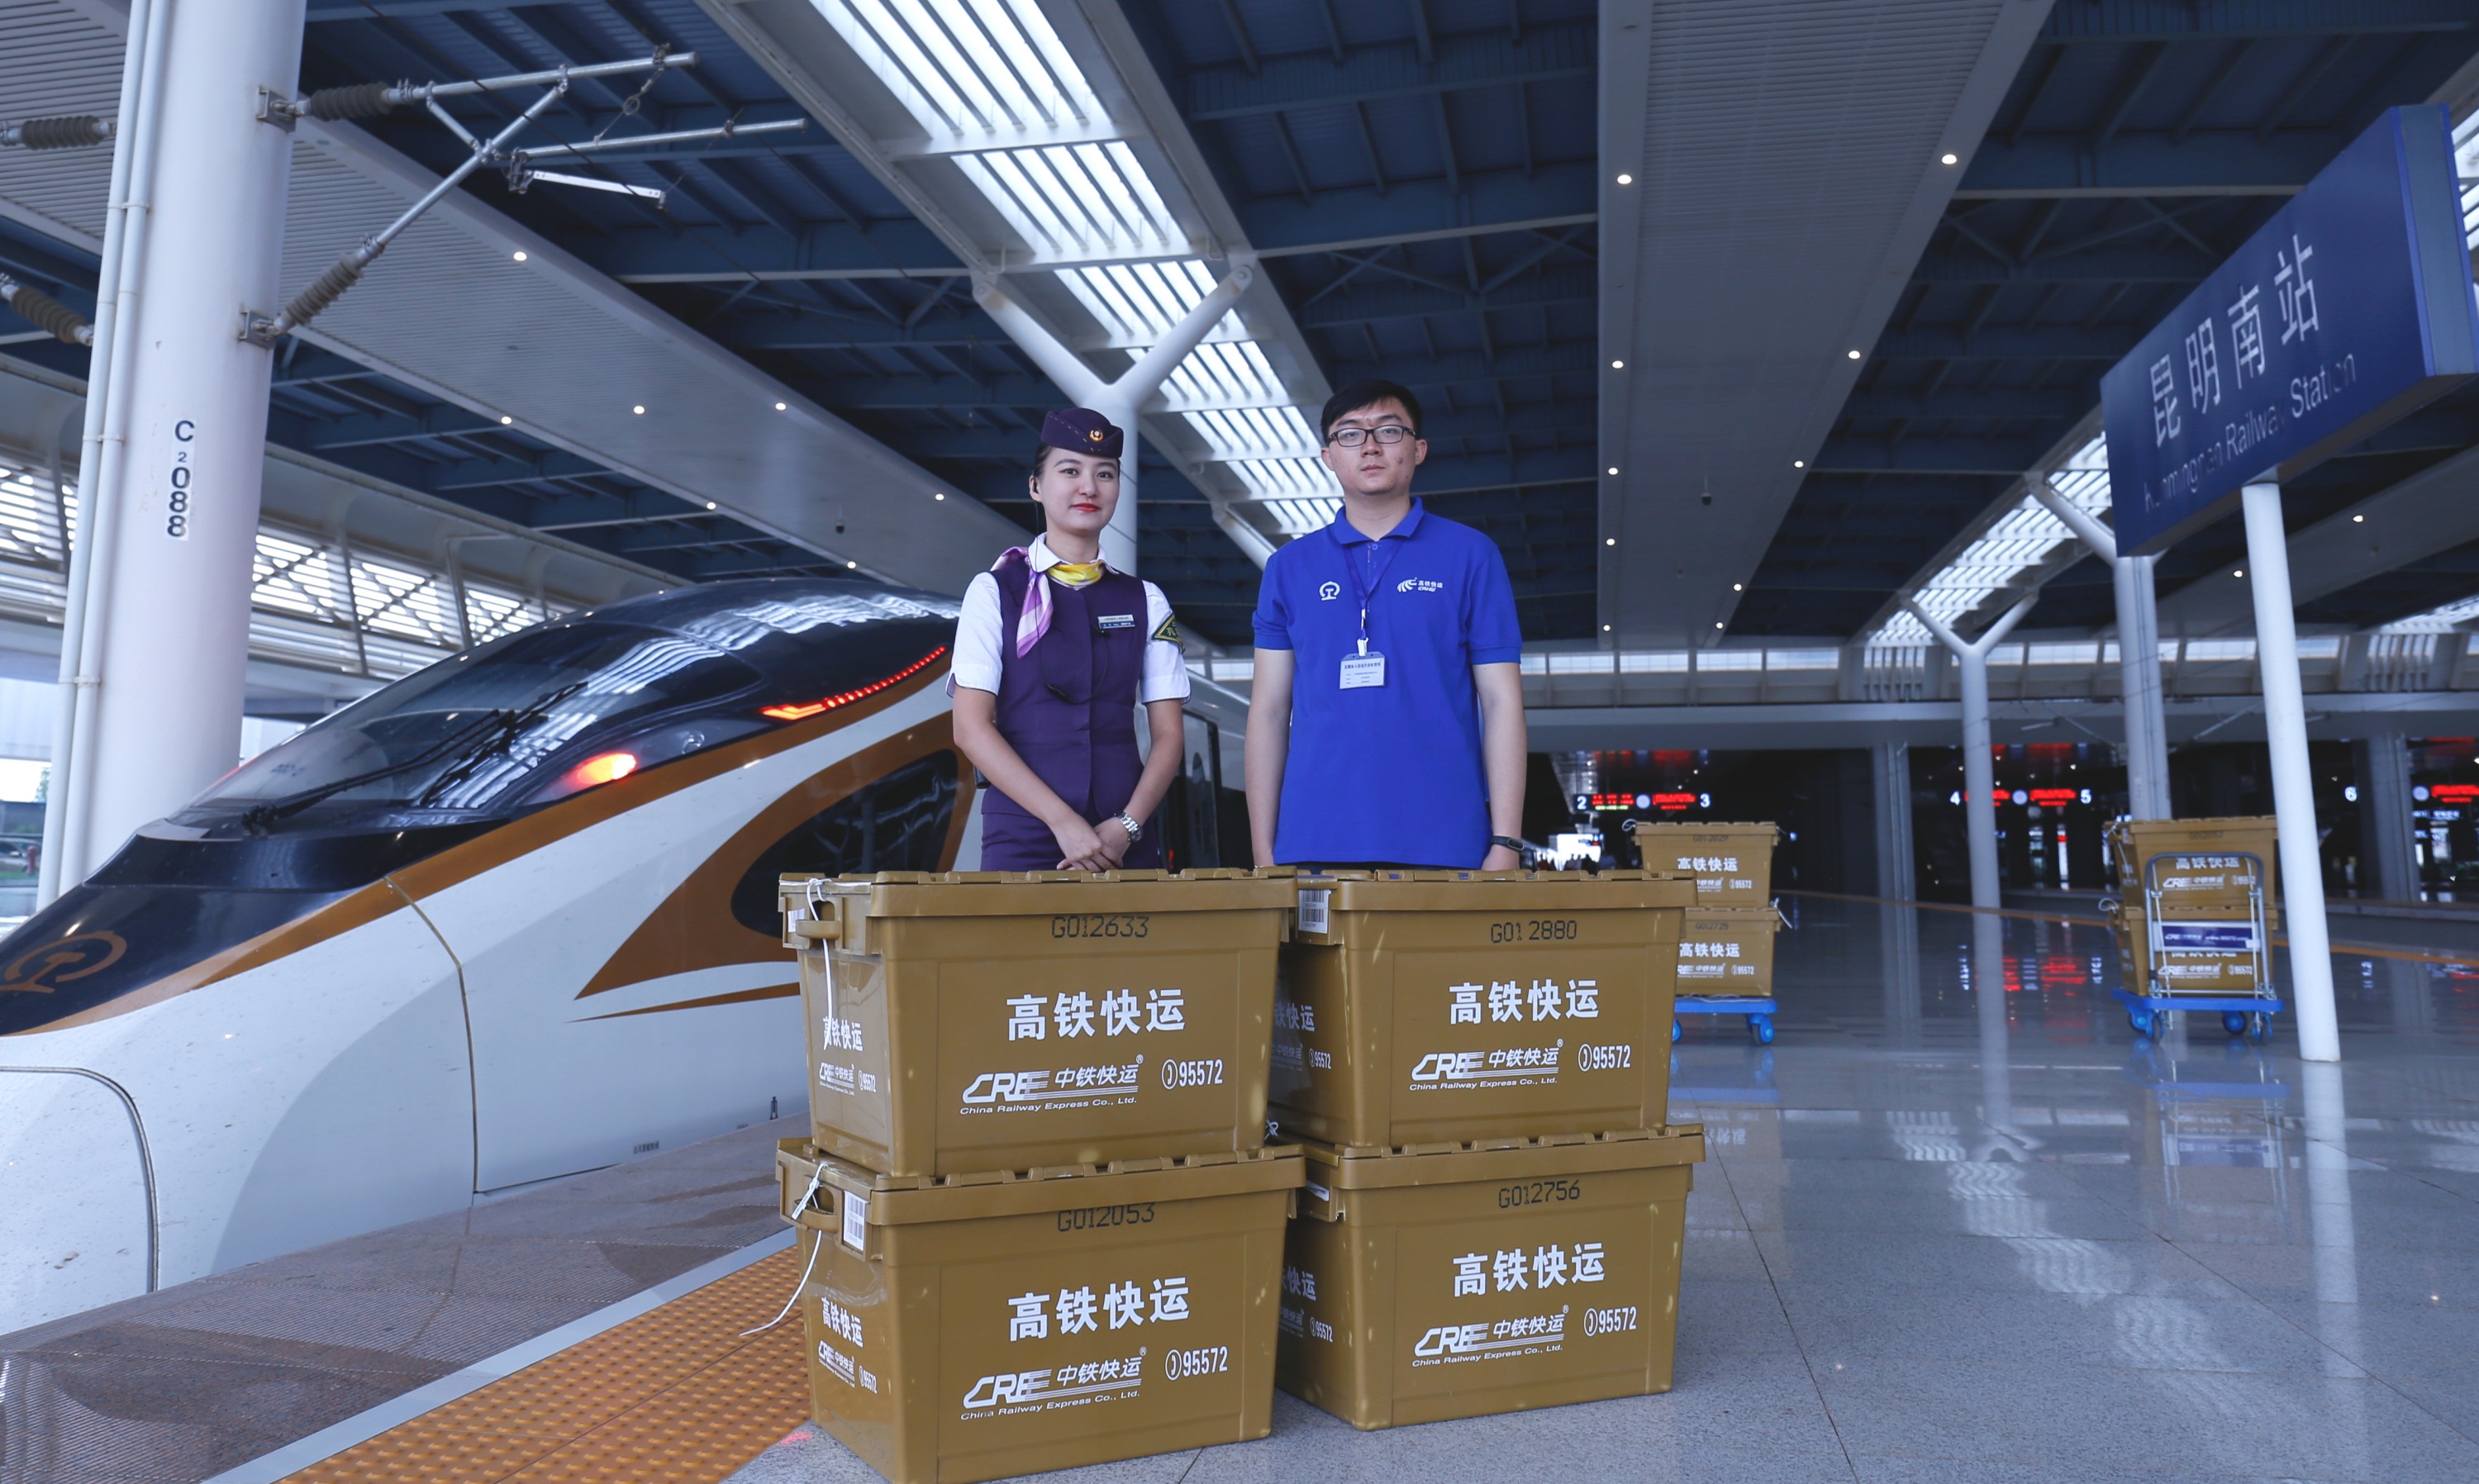 JD’s use of high speed rail provides many advantages when it comes to minimizing travel time between the source of the food’s production and the customer’s door